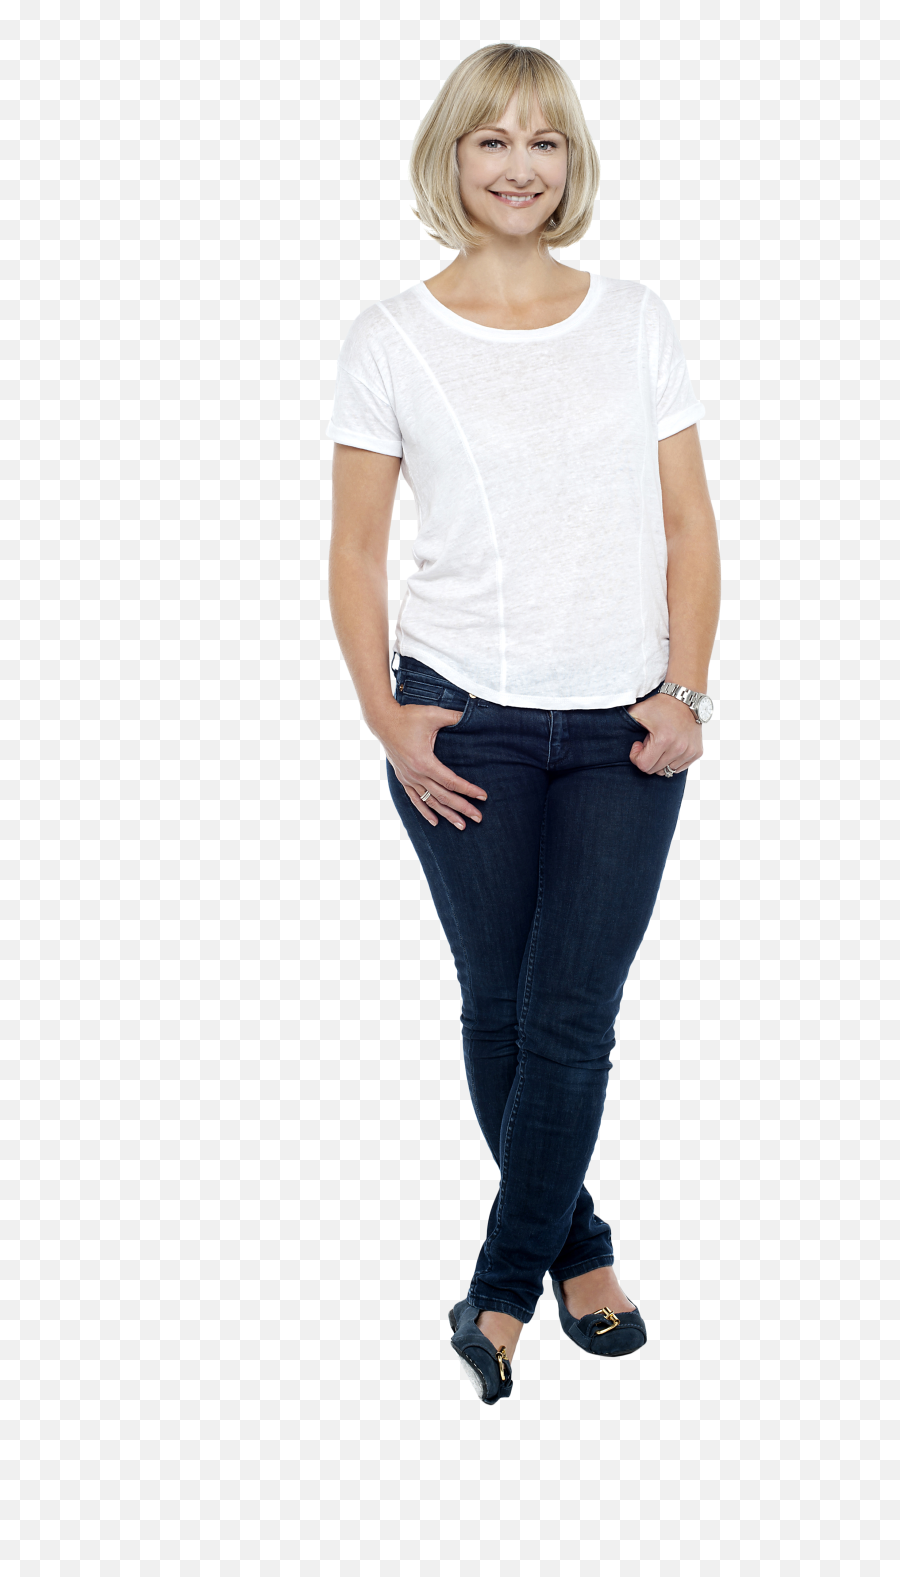 Standing Women Png Images Transparent - Woman Standing Transparent Background Emoji,Woman Transparent Background